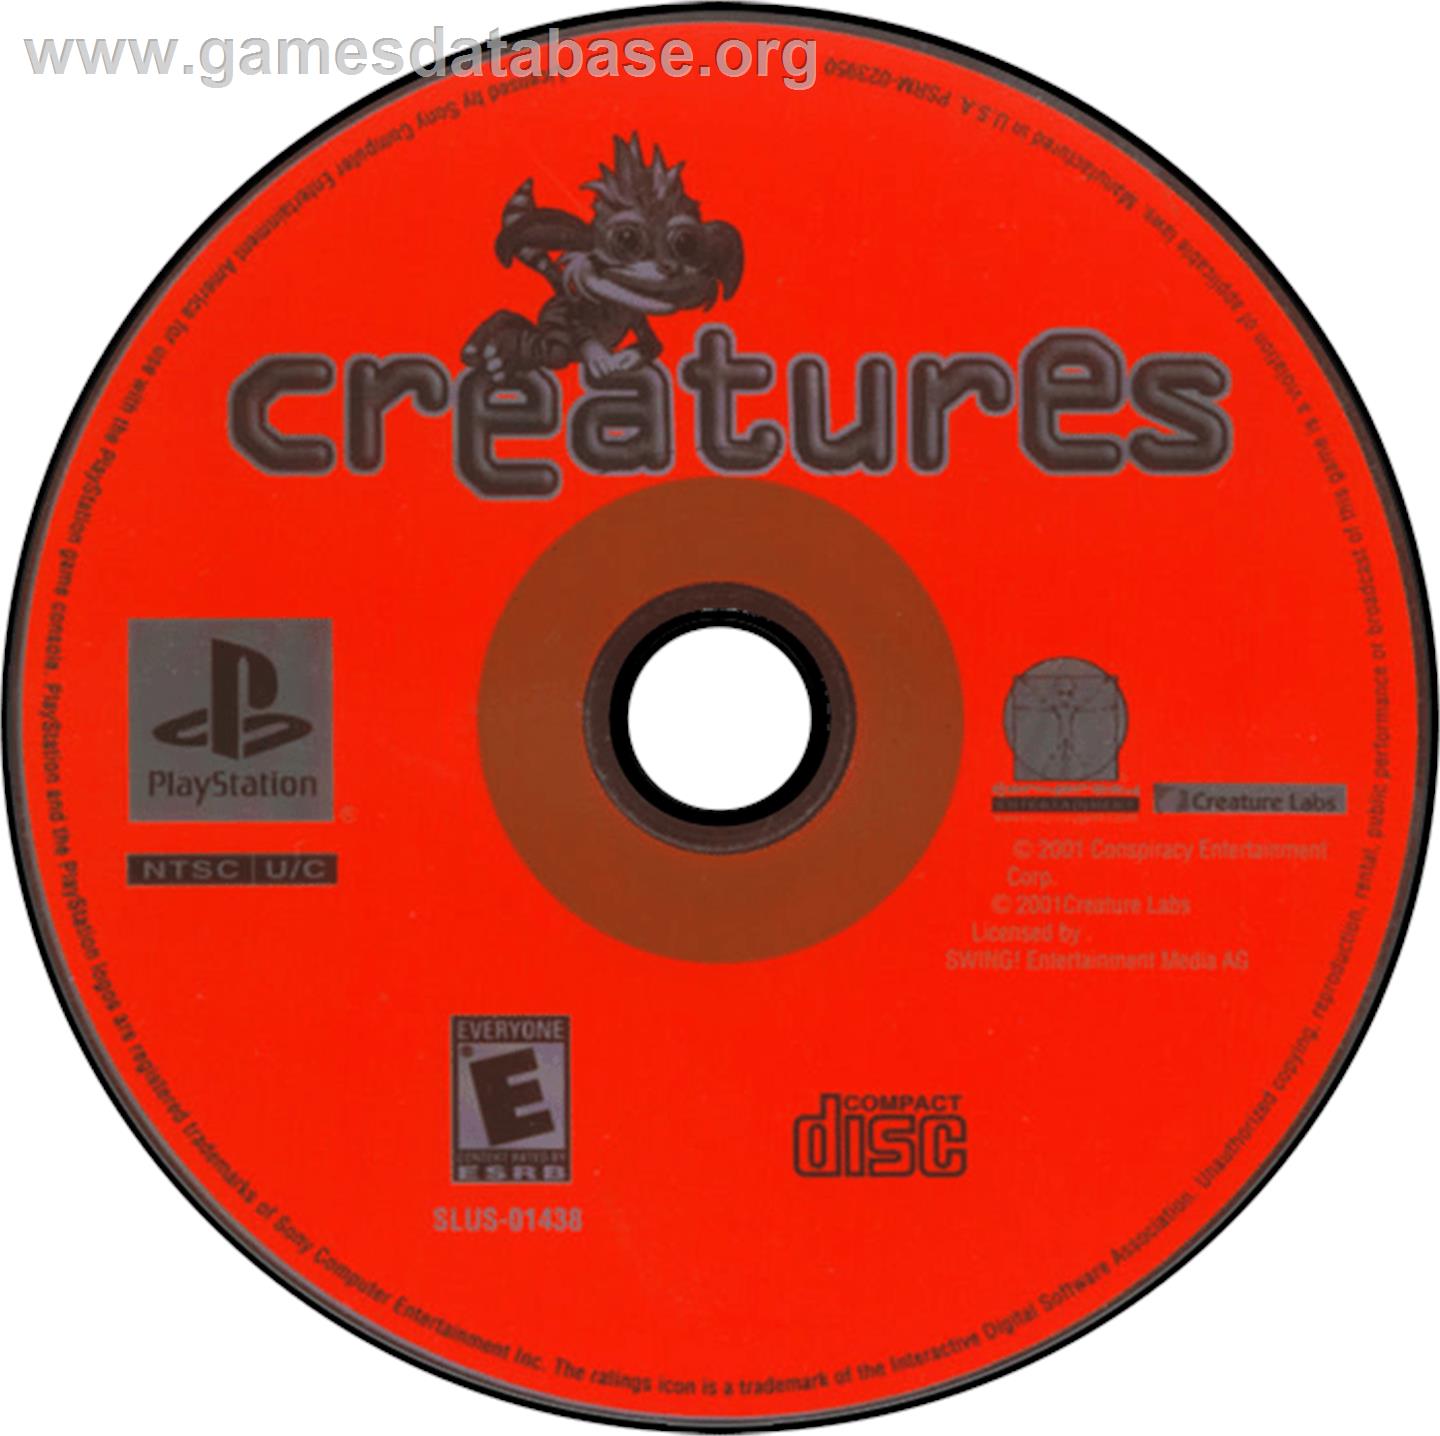 Creatures - Sony Playstation - Artwork - Disc